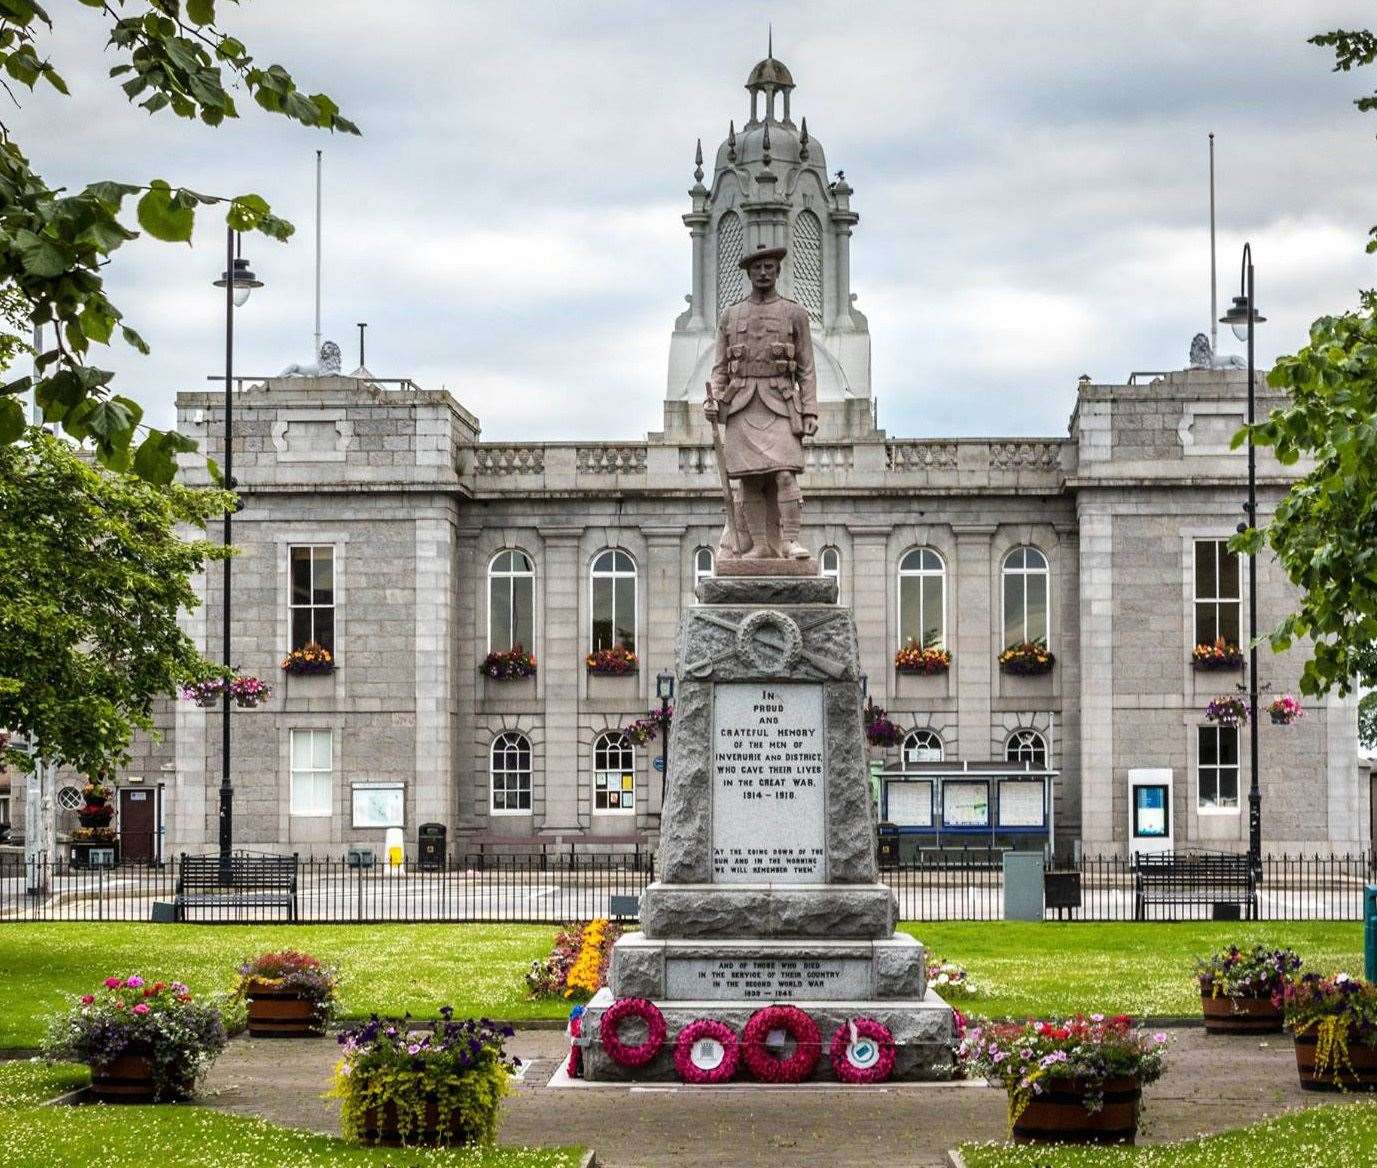 The event takes place in Inverurie Town Hall